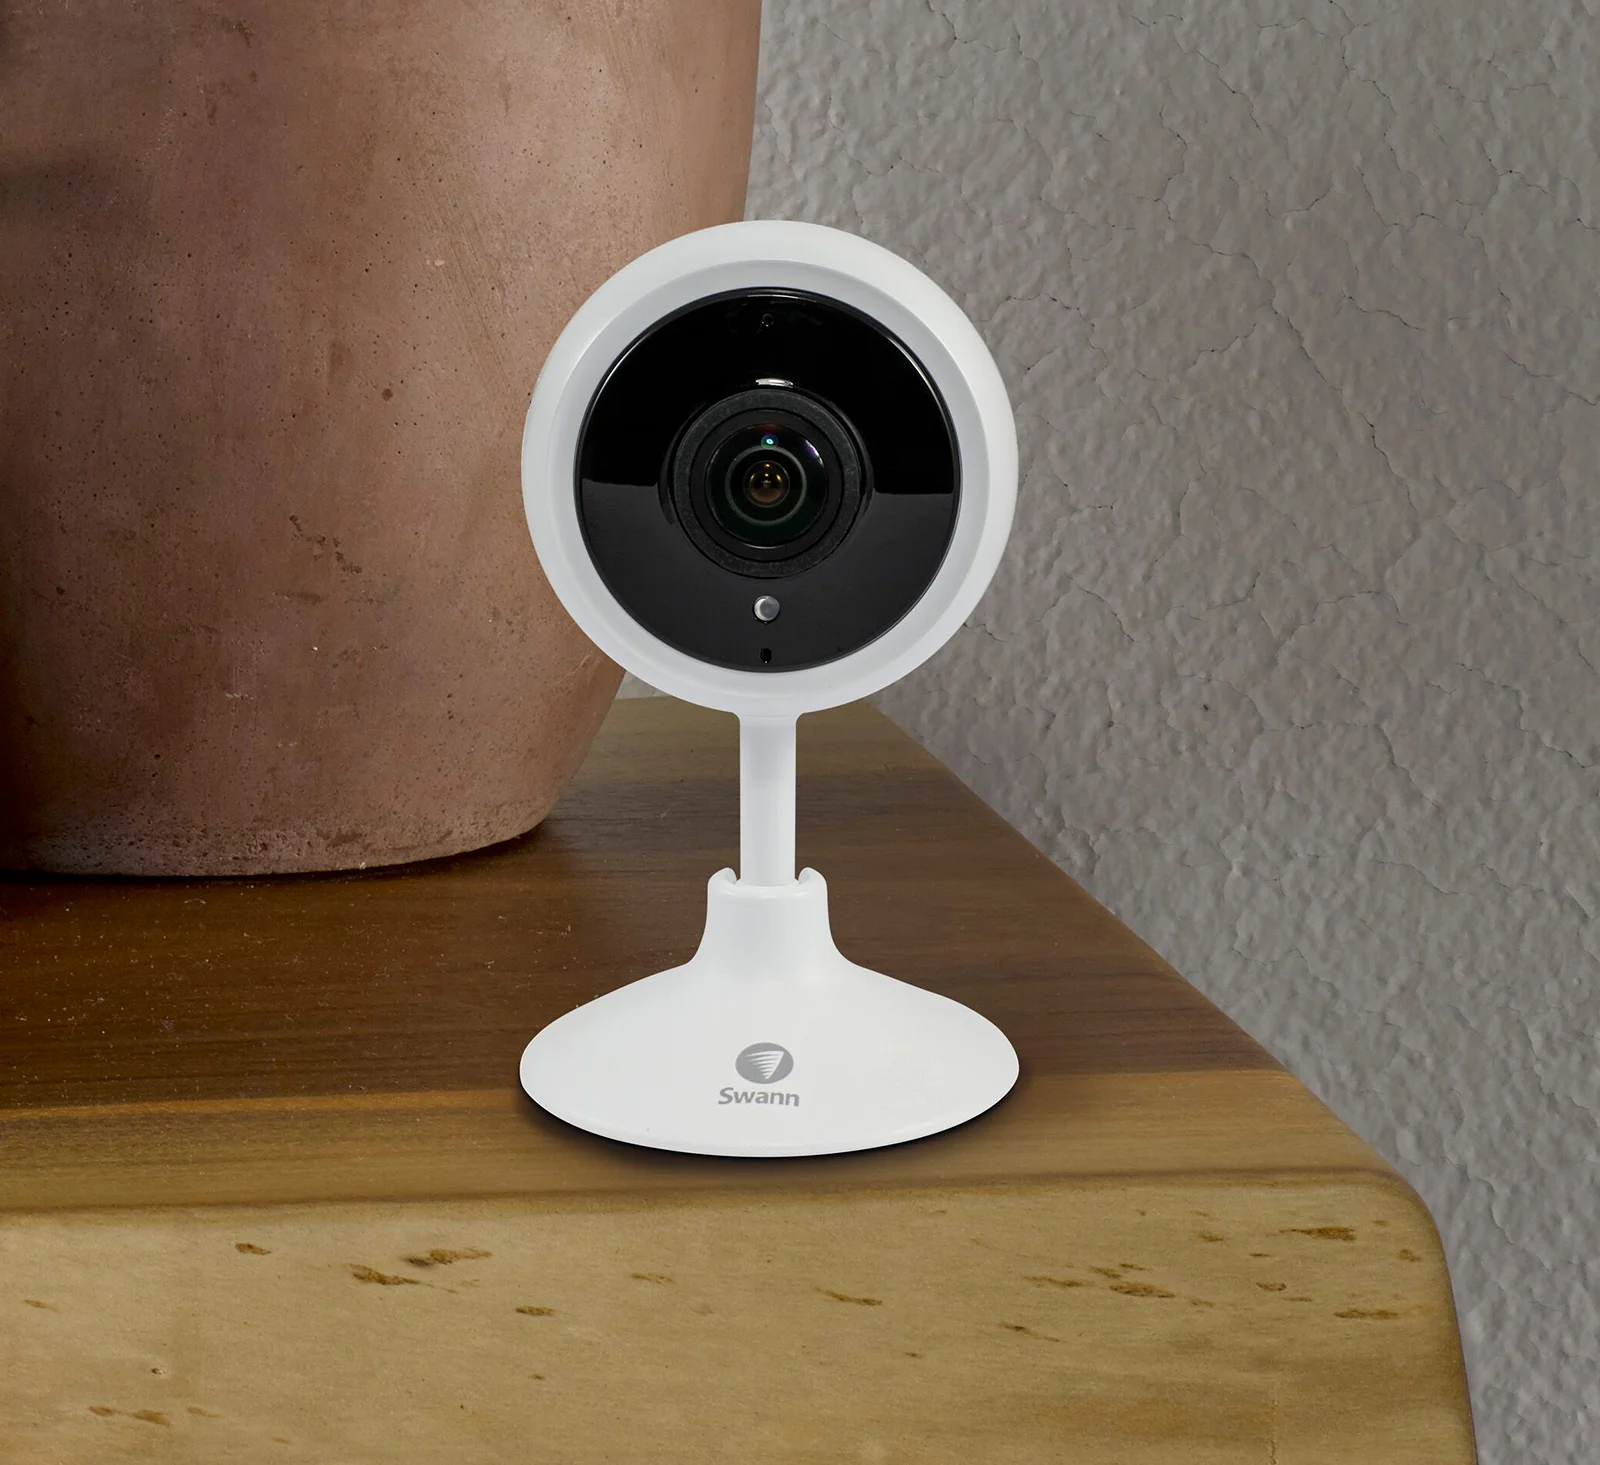 A wire-free home security camera